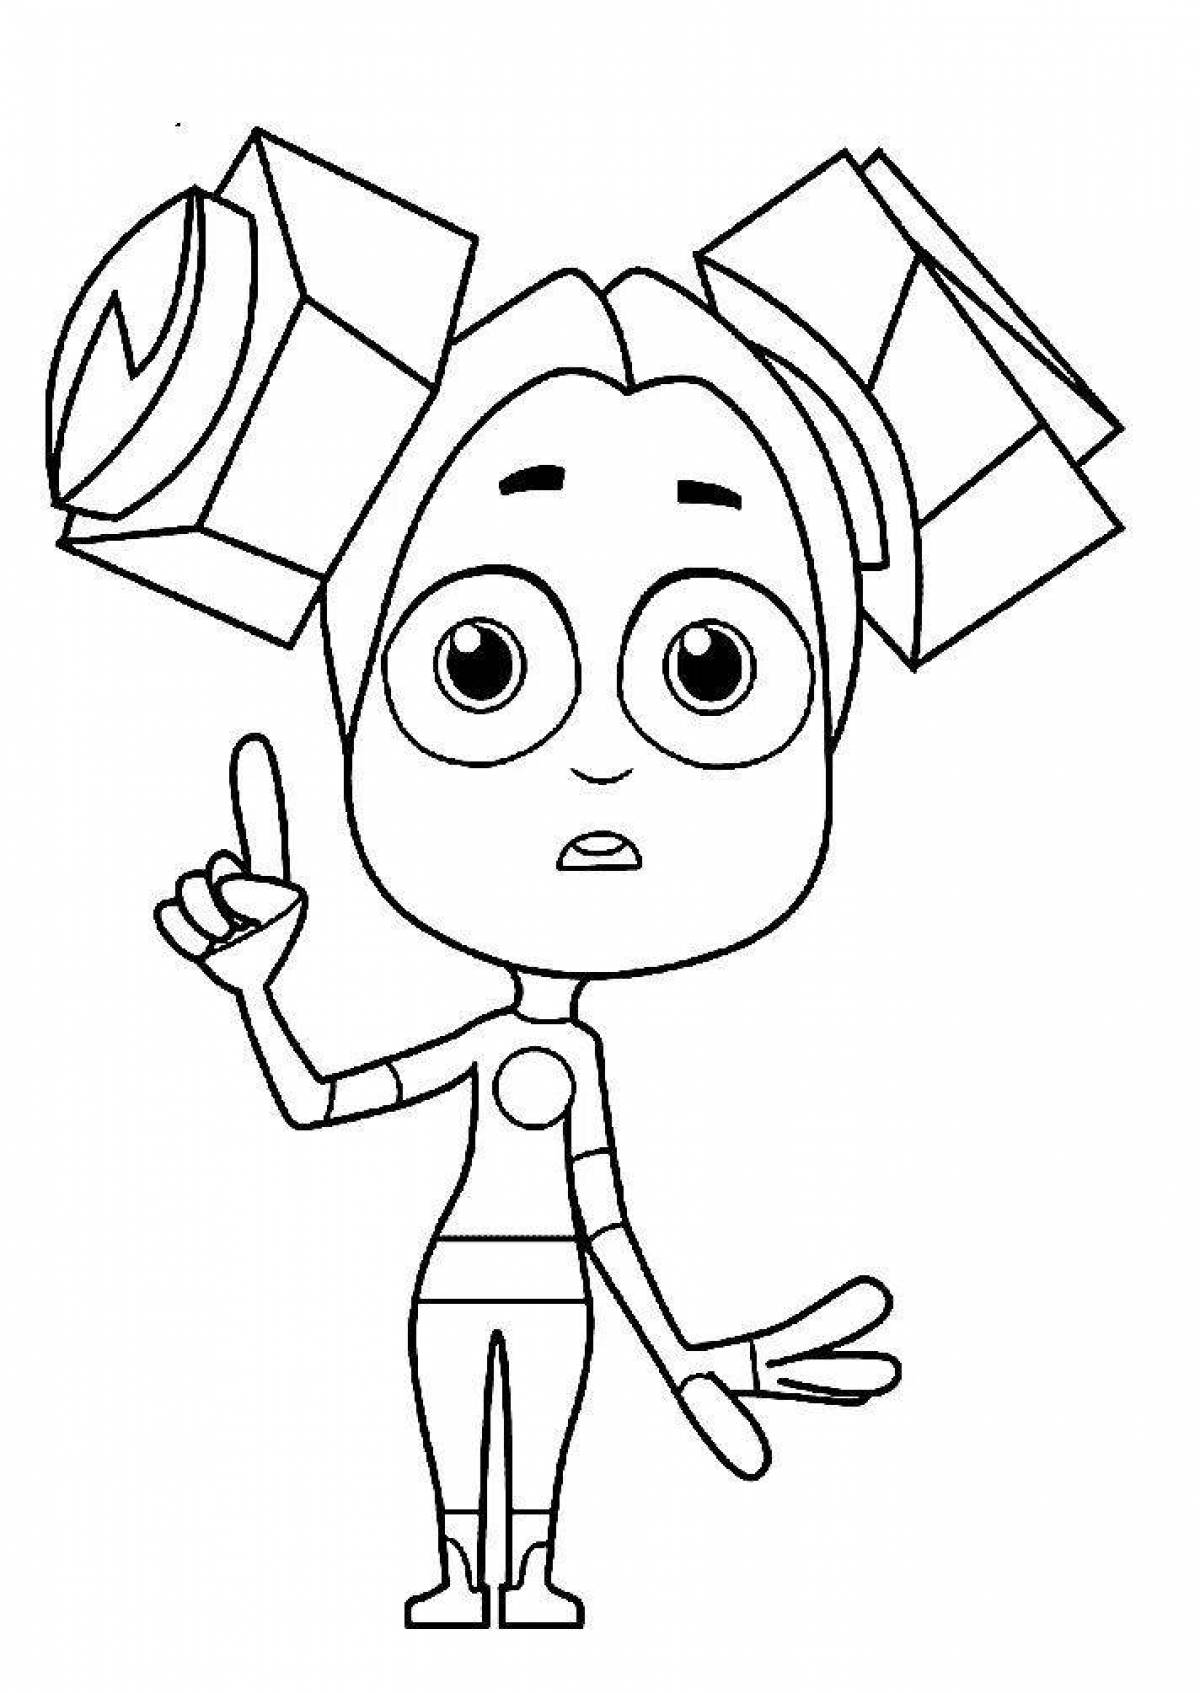 Coloring page adorable fixies